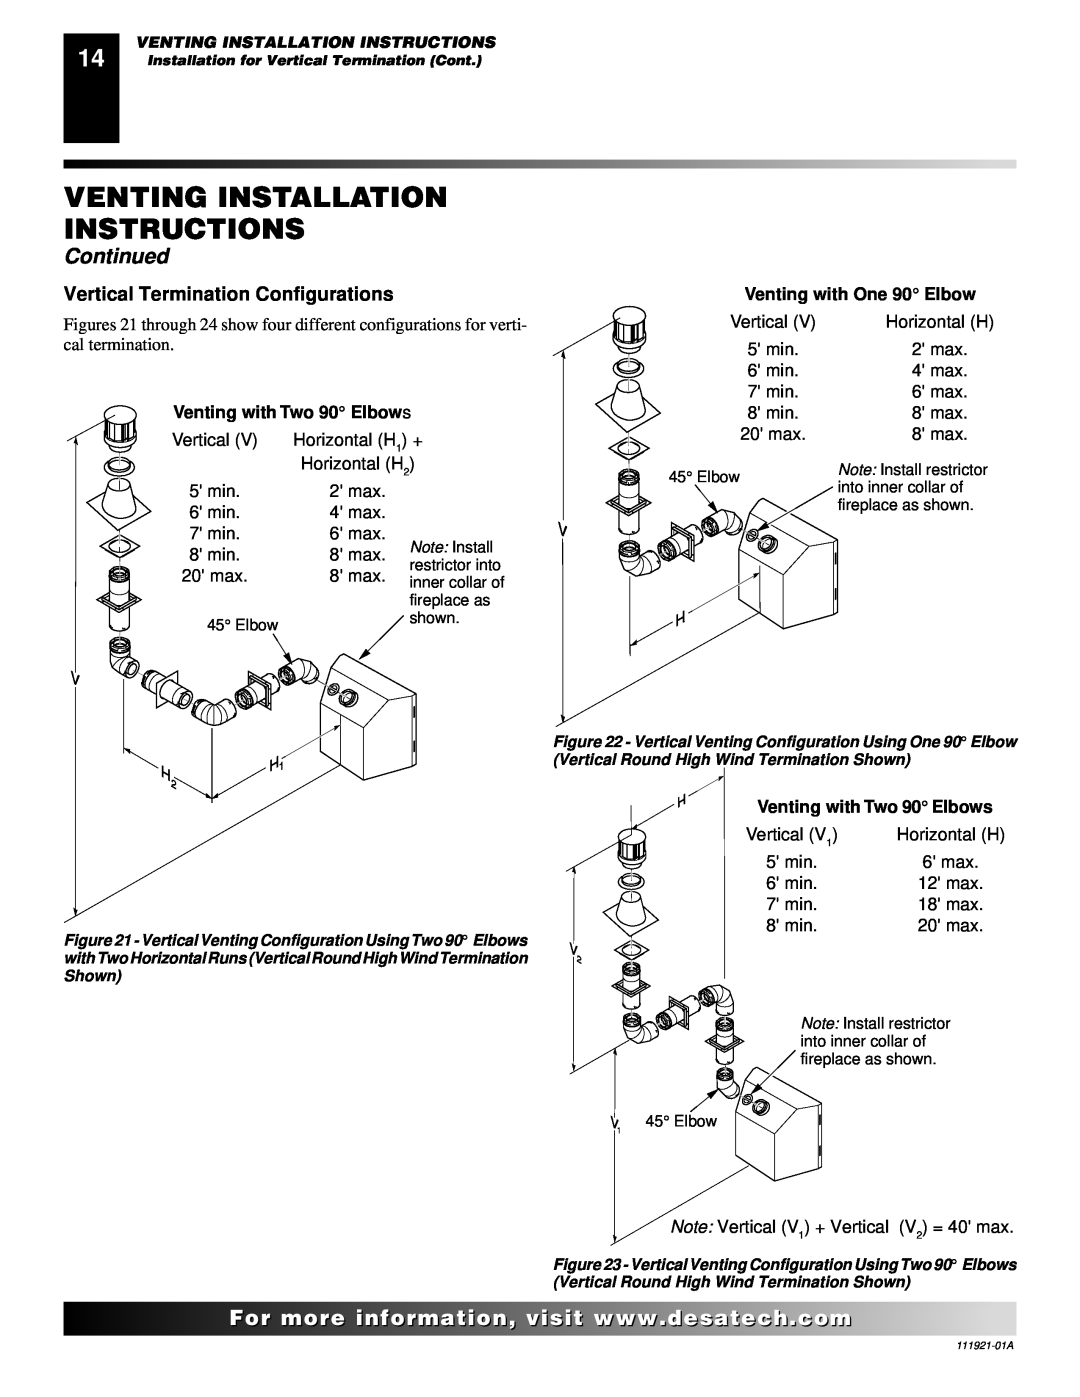 Desa (V)K42N Venting Installation Instructions, Continued, Vertical Termination Configurations, Venting with Two 90 Elbows 